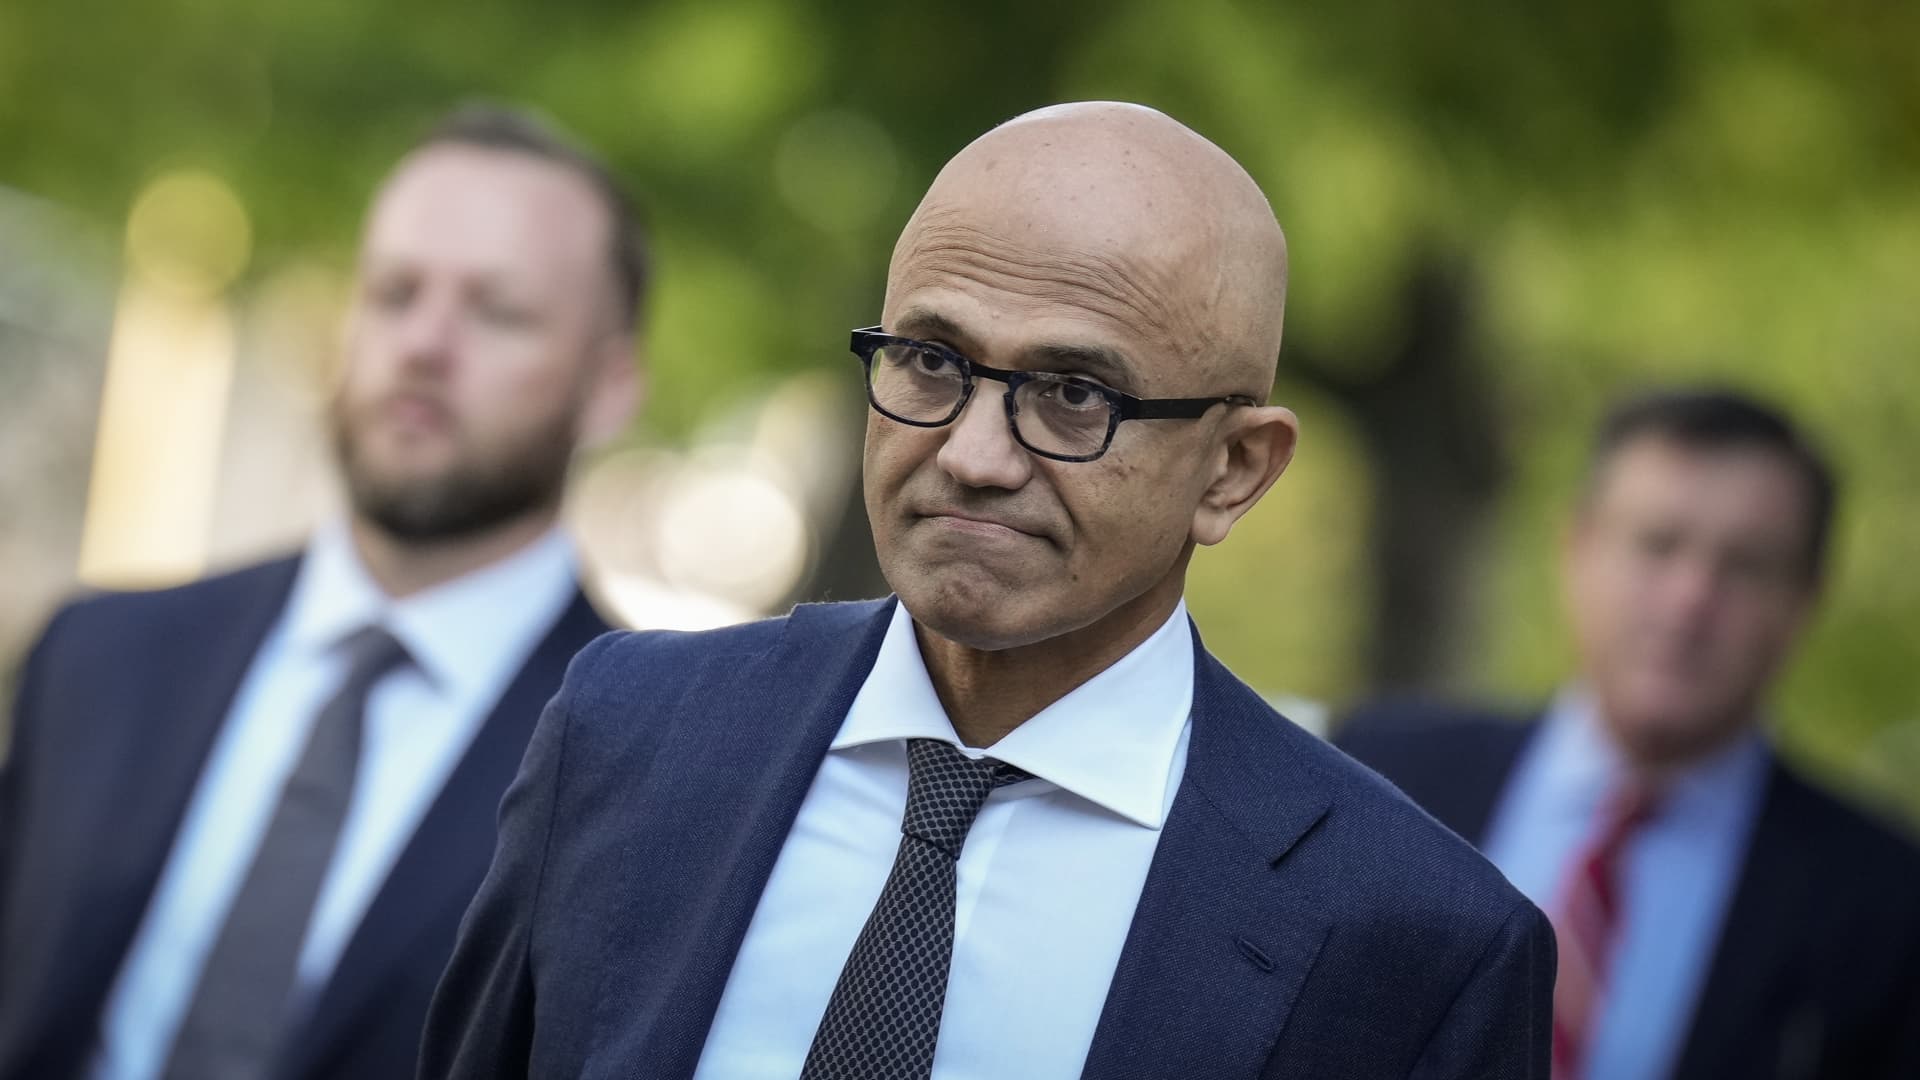 It's 'really the Google web': Microsoft CEO testifies about how hard it is to break into search